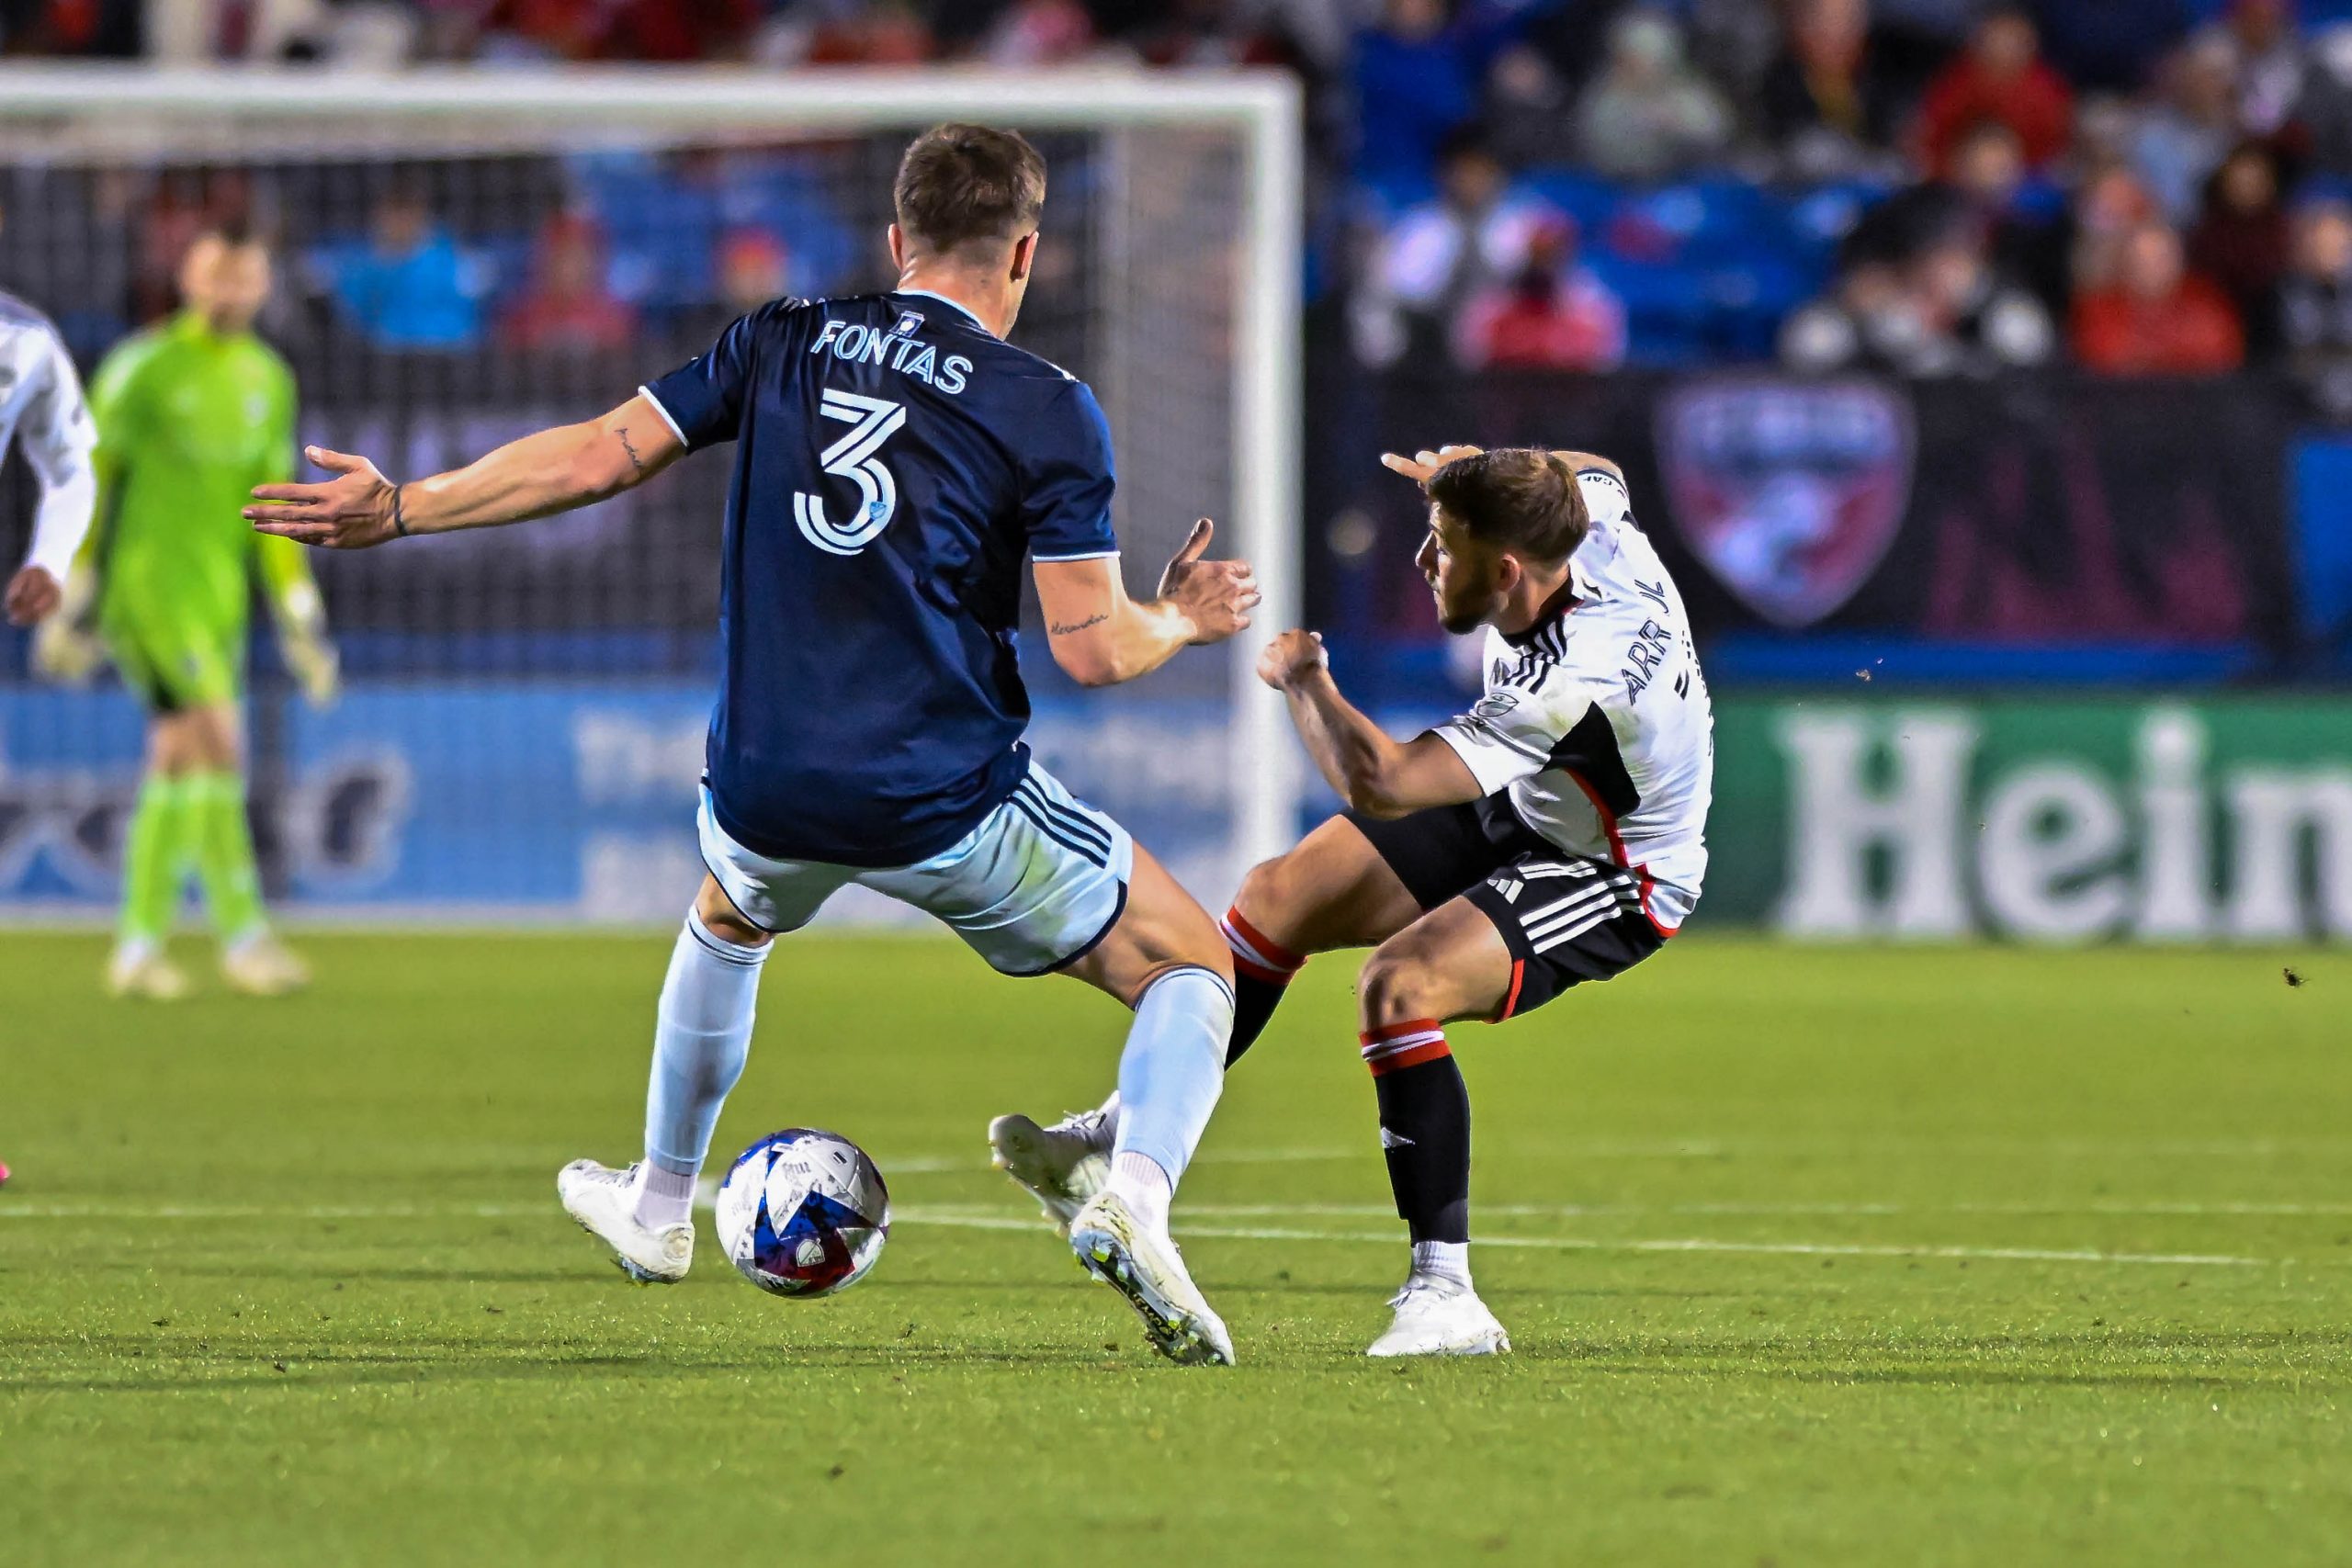 Paul Arriola megs Sporting KC defending Andreu Fontas in the MLS match on Saturday, March 18, 2023, at Toyota Stadium. (Daniel McCullough, 3rd Degree)